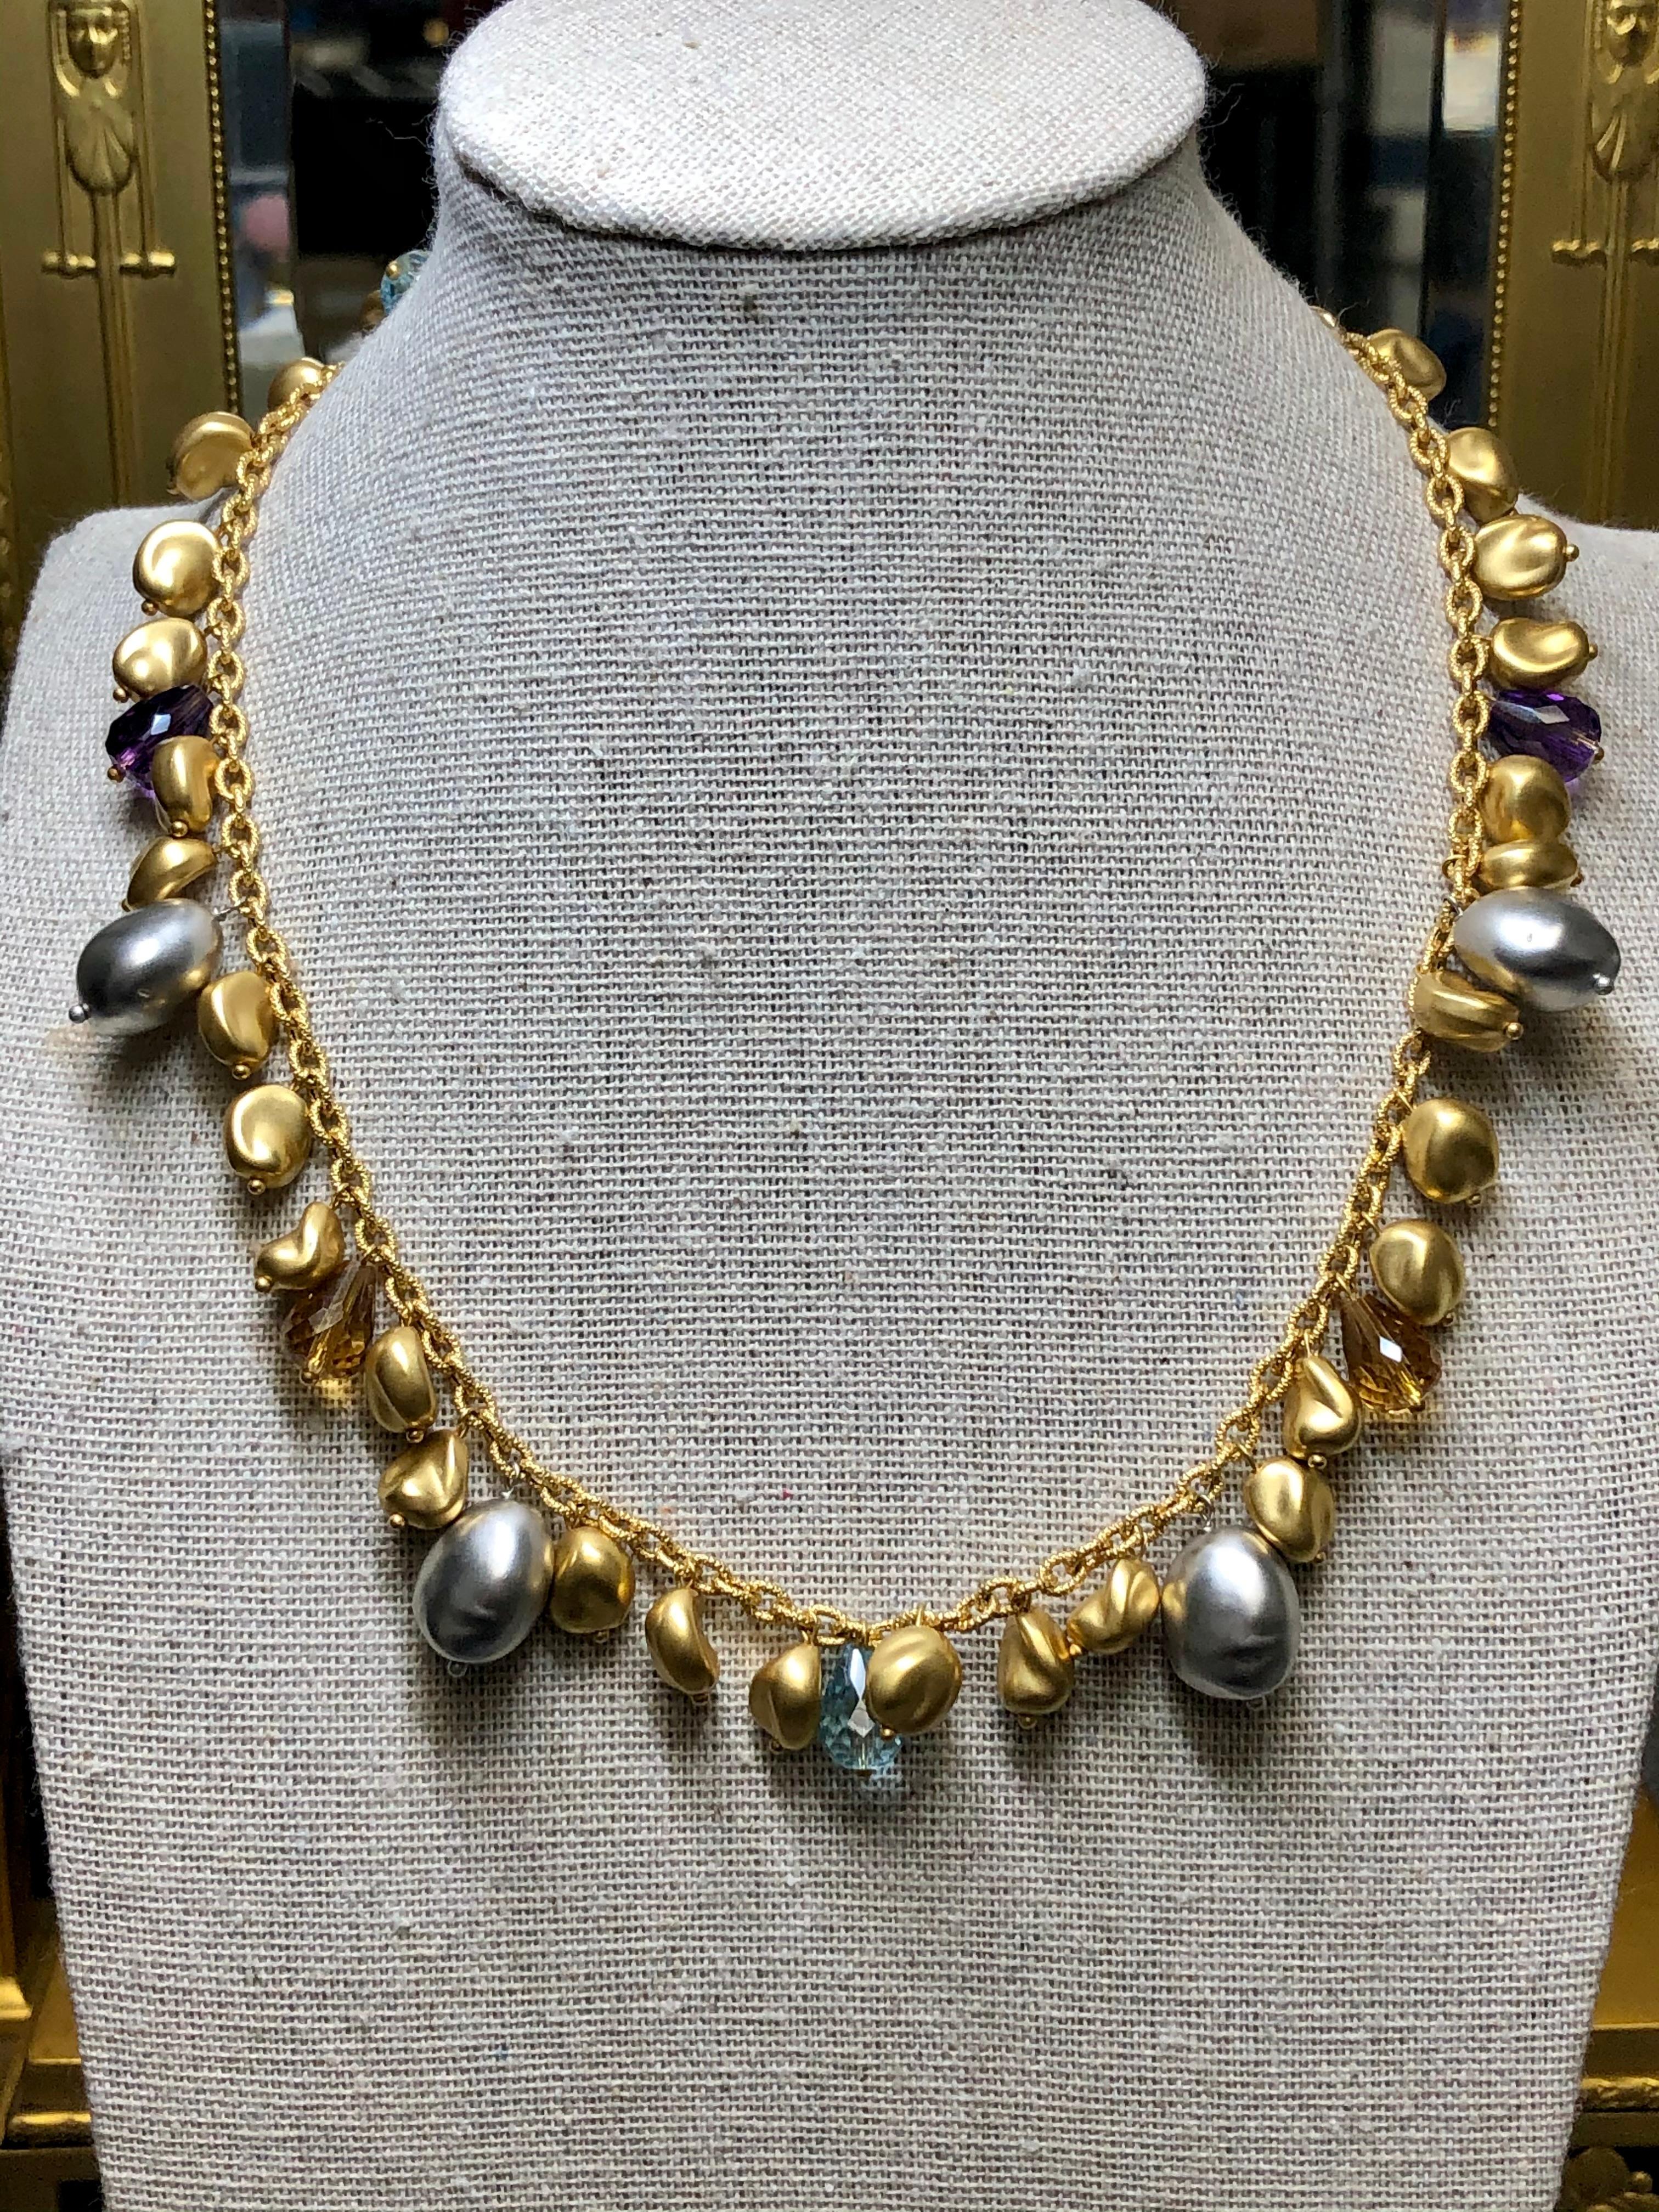 A contemporary necklace done by designer ROBERTO COIN hand crafted in 18K white and yellow gold and finished with faceted, briolette natural topaz and amethyst. Each nugget of gold is gorgeously satin finished and perfectly spaced throughout the